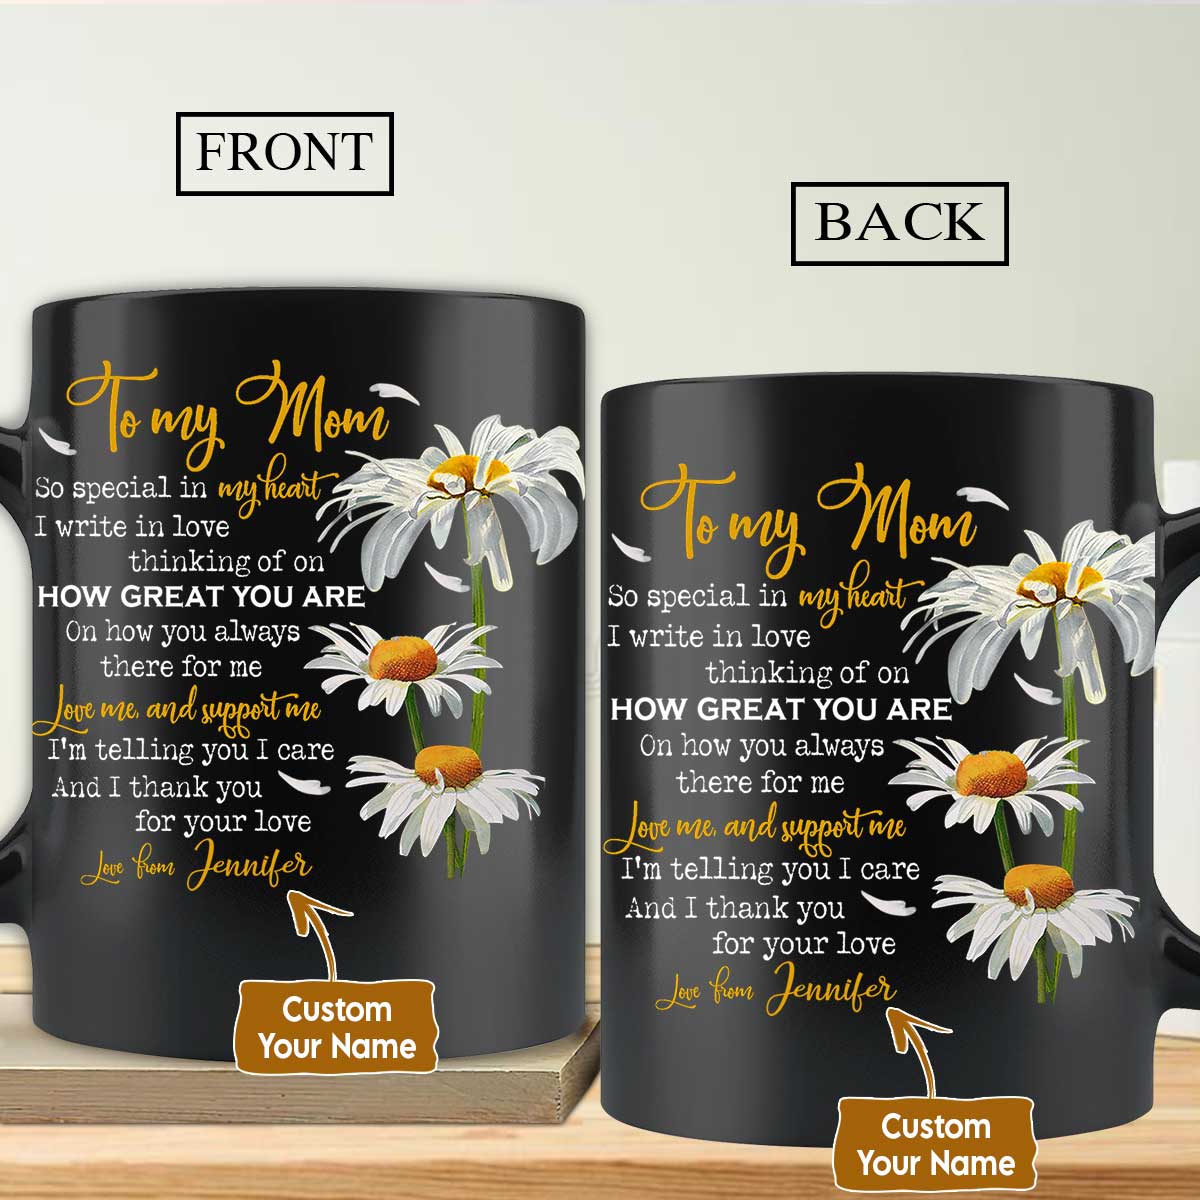 Gift For Mom Personalized Mug - Daughter to mom, Daisy painting Mug, I thank you for your love Mug - Custom Gift For Mother's Day, Presents for Mom